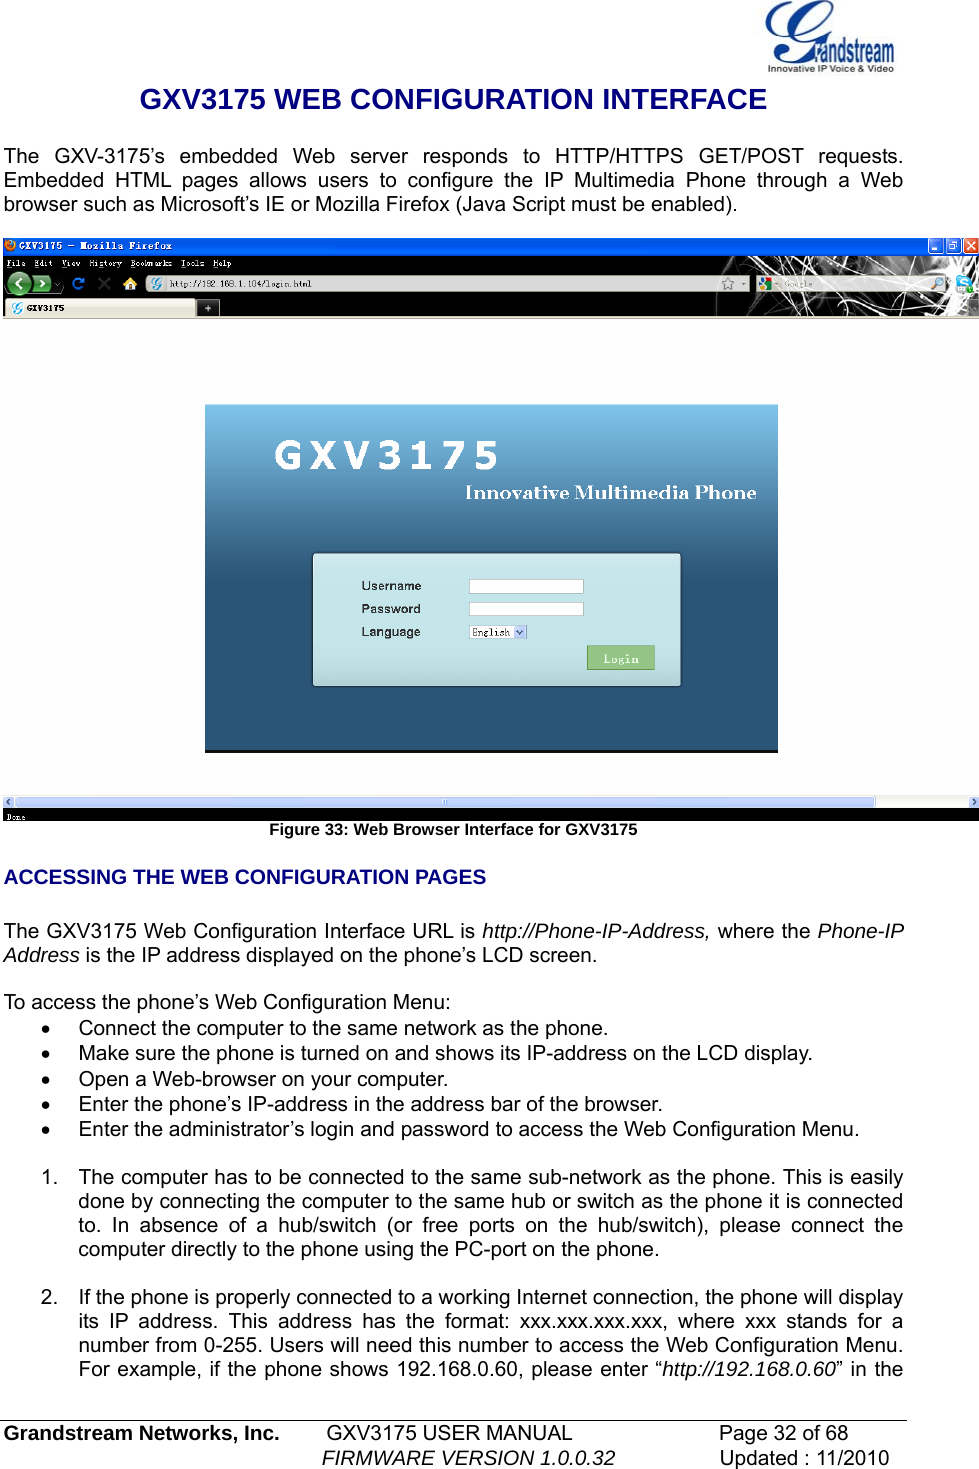   GXV3175 WEB CONFIGURATION INTERFACE  The GXV-3175’s embedded Web server responds to HTTP/HTTPS GET/POST requests. Embedded HTML pages allows users to configure the IP Multimedia Phone through a Web browser such as Microsoft’s IE or Mozilla Firefox (Java Script must be enabled).    Figure 33: Web Browser Interface for GXV3175 ACCESSING THE WEB CONFIGURATION PAGES  The GXV3175 Web Configuration Interface URL is http://Phone-IP-Address, where the Phone-IP Address is the IP address displayed on the phone’s LCD screen.  To access the phone’s Web Configuration Menu: •  Connect the computer to the same network as the phone. •  Make sure the phone is turned on and shows its IP-address on the LCD display. •  Open a Web-browser on your computer. •  Enter the phone’s IP-address in the address bar of the browser. •  Enter the administrator’s login and password to access the Web Configuration Menu.    1.  The computer has to be connected to the same sub-network as the phone. This is easily done by connecting the computer to the same hub or switch as the phone it is connected to. In absence of a hub/switch (or free ports on the hub/switch), please connect the computer directly to the phone using the PC-port on the phone.  2.  If the phone is properly connected to a working Internet connection, the phone will display its IP address. This address has the format: xxx.xxx.xxx.xxx, where xxx stands for a number from 0-255. Users will need this number to access the Web Configuration Menu. For example, if the phone shows 192.168.0.60, please enter “http://192.168.0.60” in the Grandstream Networks, Inc.        GXV3175 USER MANUAL                      Page 32 of 68                                                        FIRMWARE VERSION 1.0.0.32                  Updated : 11/2010  